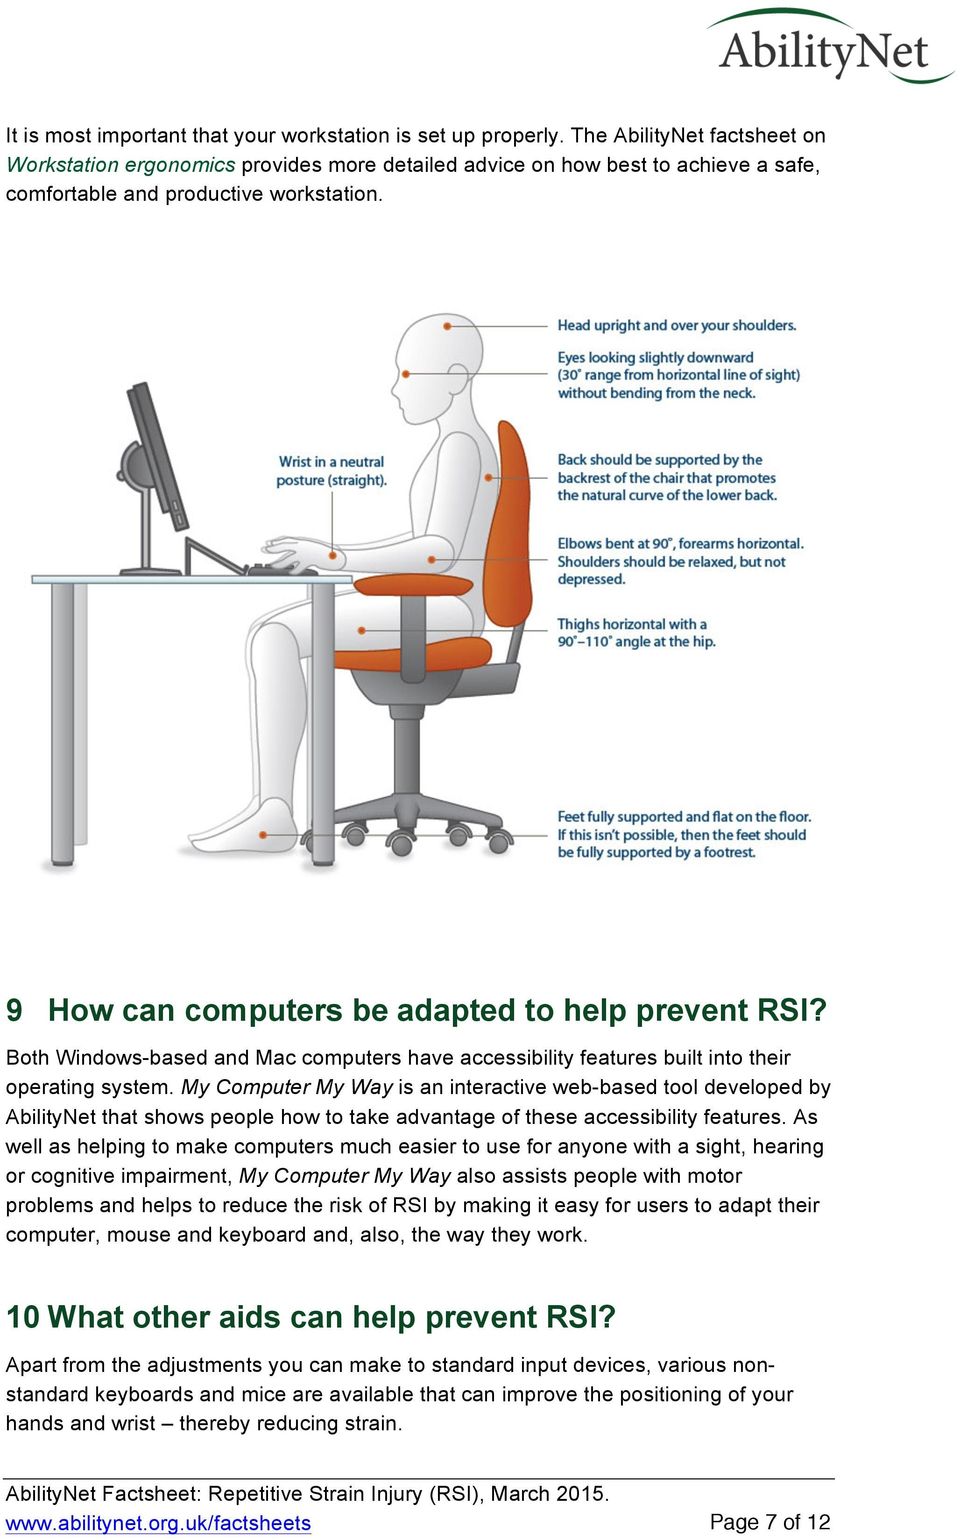 9 How can computers be adapted to help prevent RSI? Both Windows-based and Mac computers have accessibility features built into their operating system.